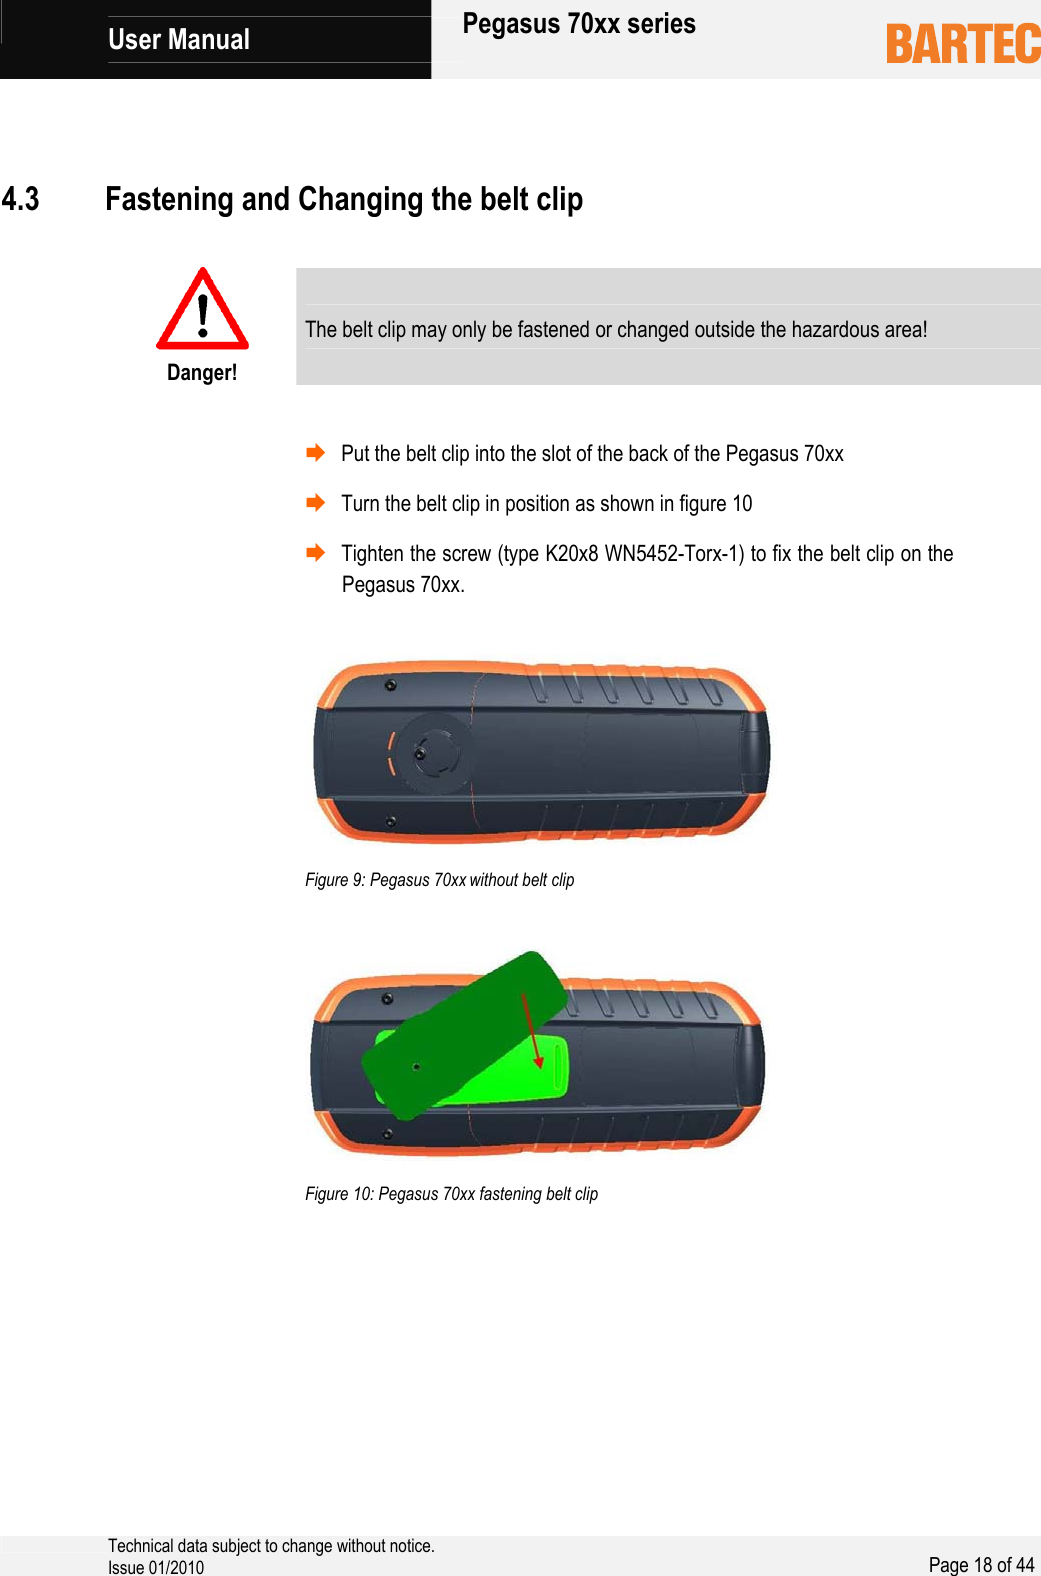             User Manual   Pegasus 70xx series     Technical data subject to change without notice. Issue 01/2010  Page 18 of 44      Danger! The belt clip may only be fastened or changed outside the hazardous area!    ¨ Put the belt clip into the slot of the back of the Pegasus 70xx ¨ Turn the belt clip in position as shown in figure 10 ¨ Tighten the screw (type K20x8 WN5452-Torx-1) to fix the belt clip on the Pegasus 70xx.     Figure 9: Pegasus 70xx without belt clip     Figure 10: Pegasus 70xx fastening belt clip  4.3 Fastening and Changing the belt clip